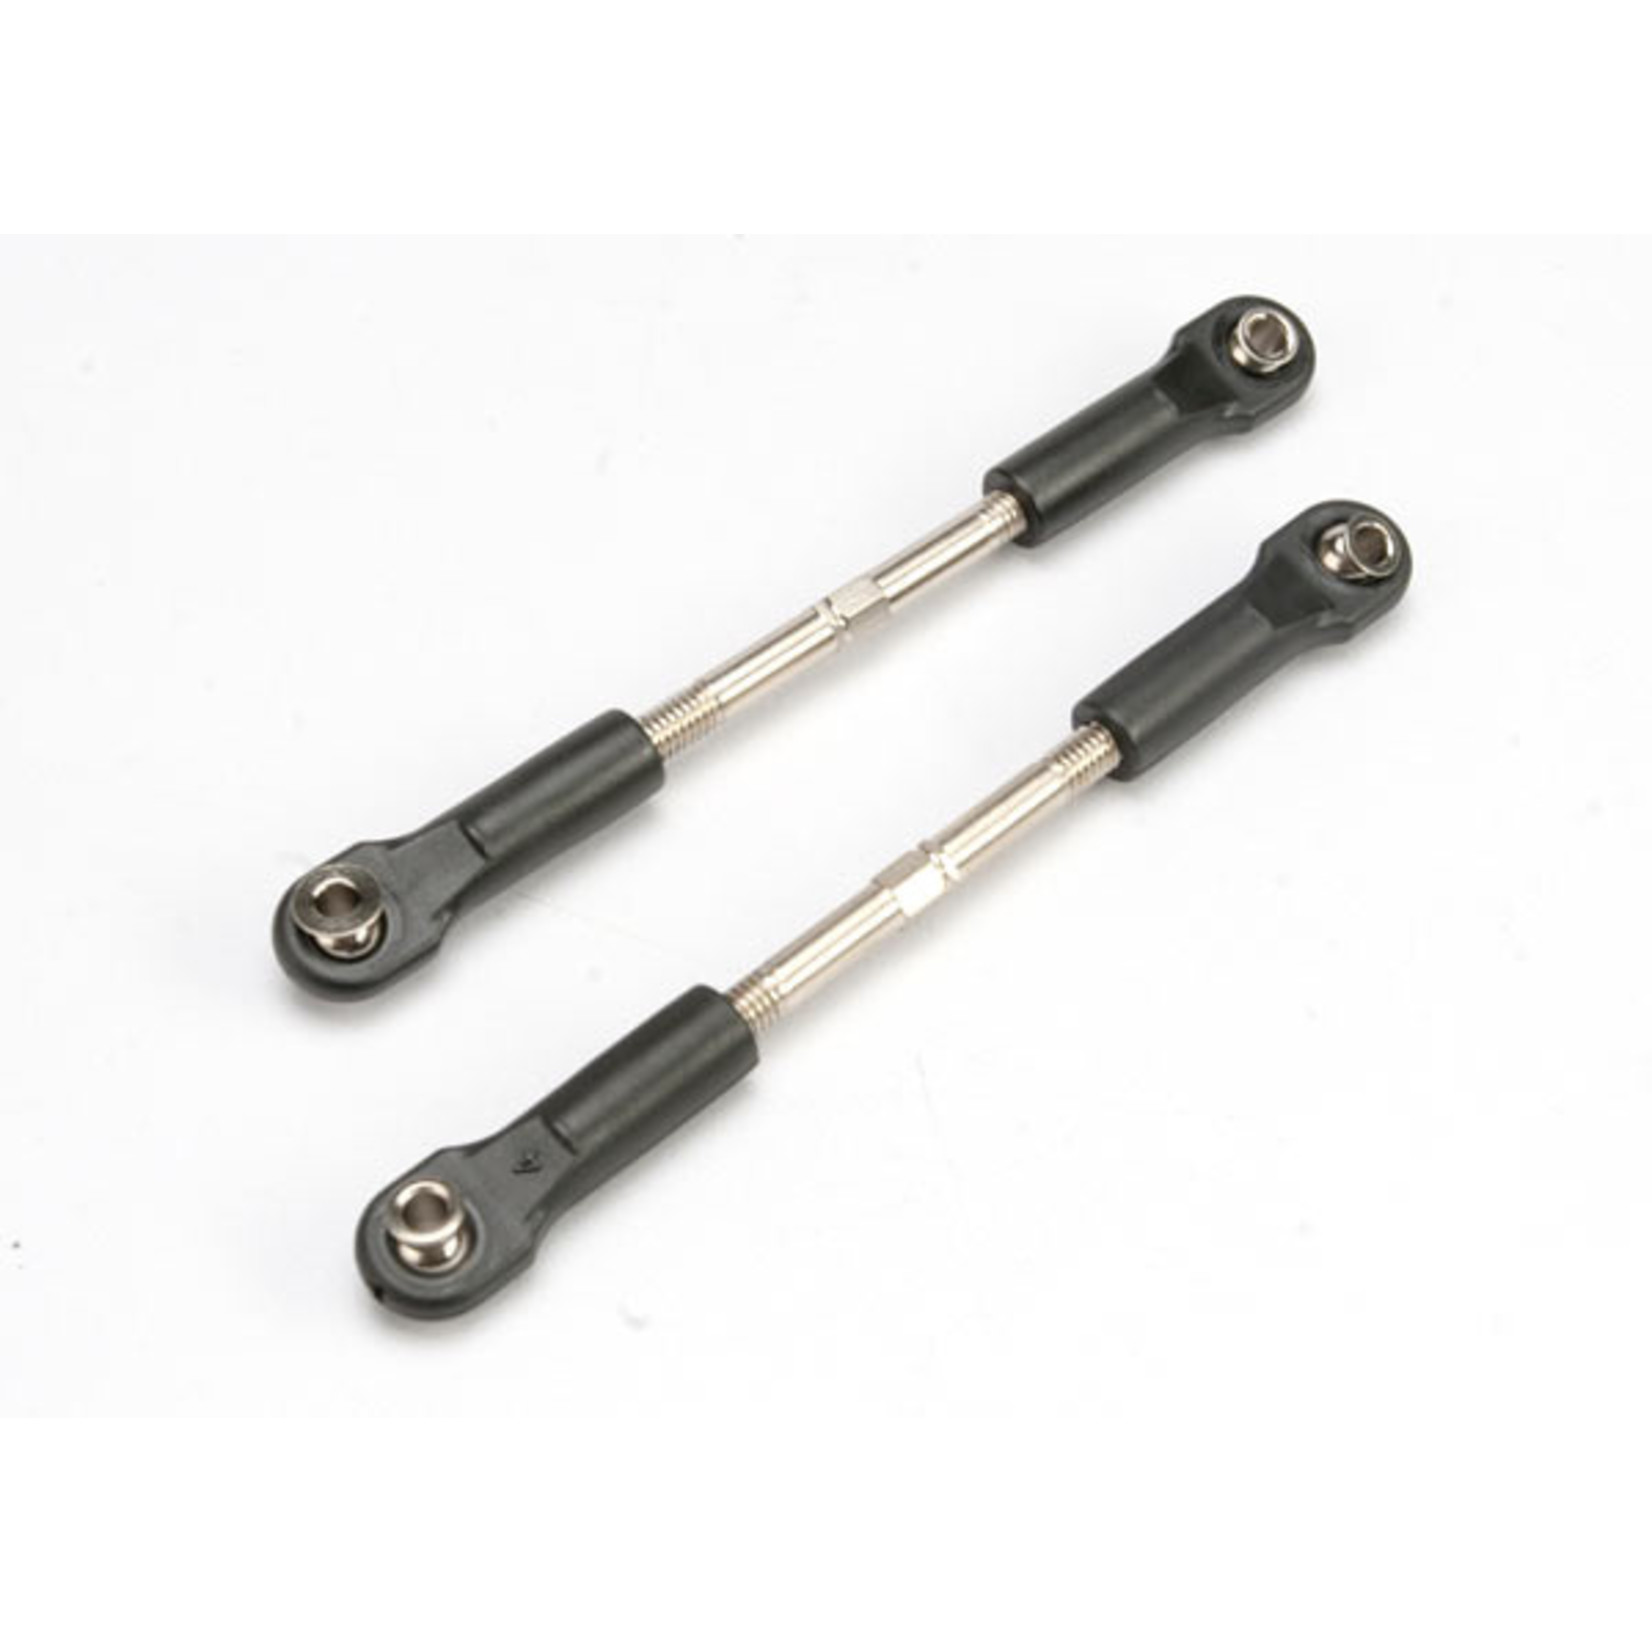 Traxxas 5539 - Turnbuckles, camber links, 58mm (assembled